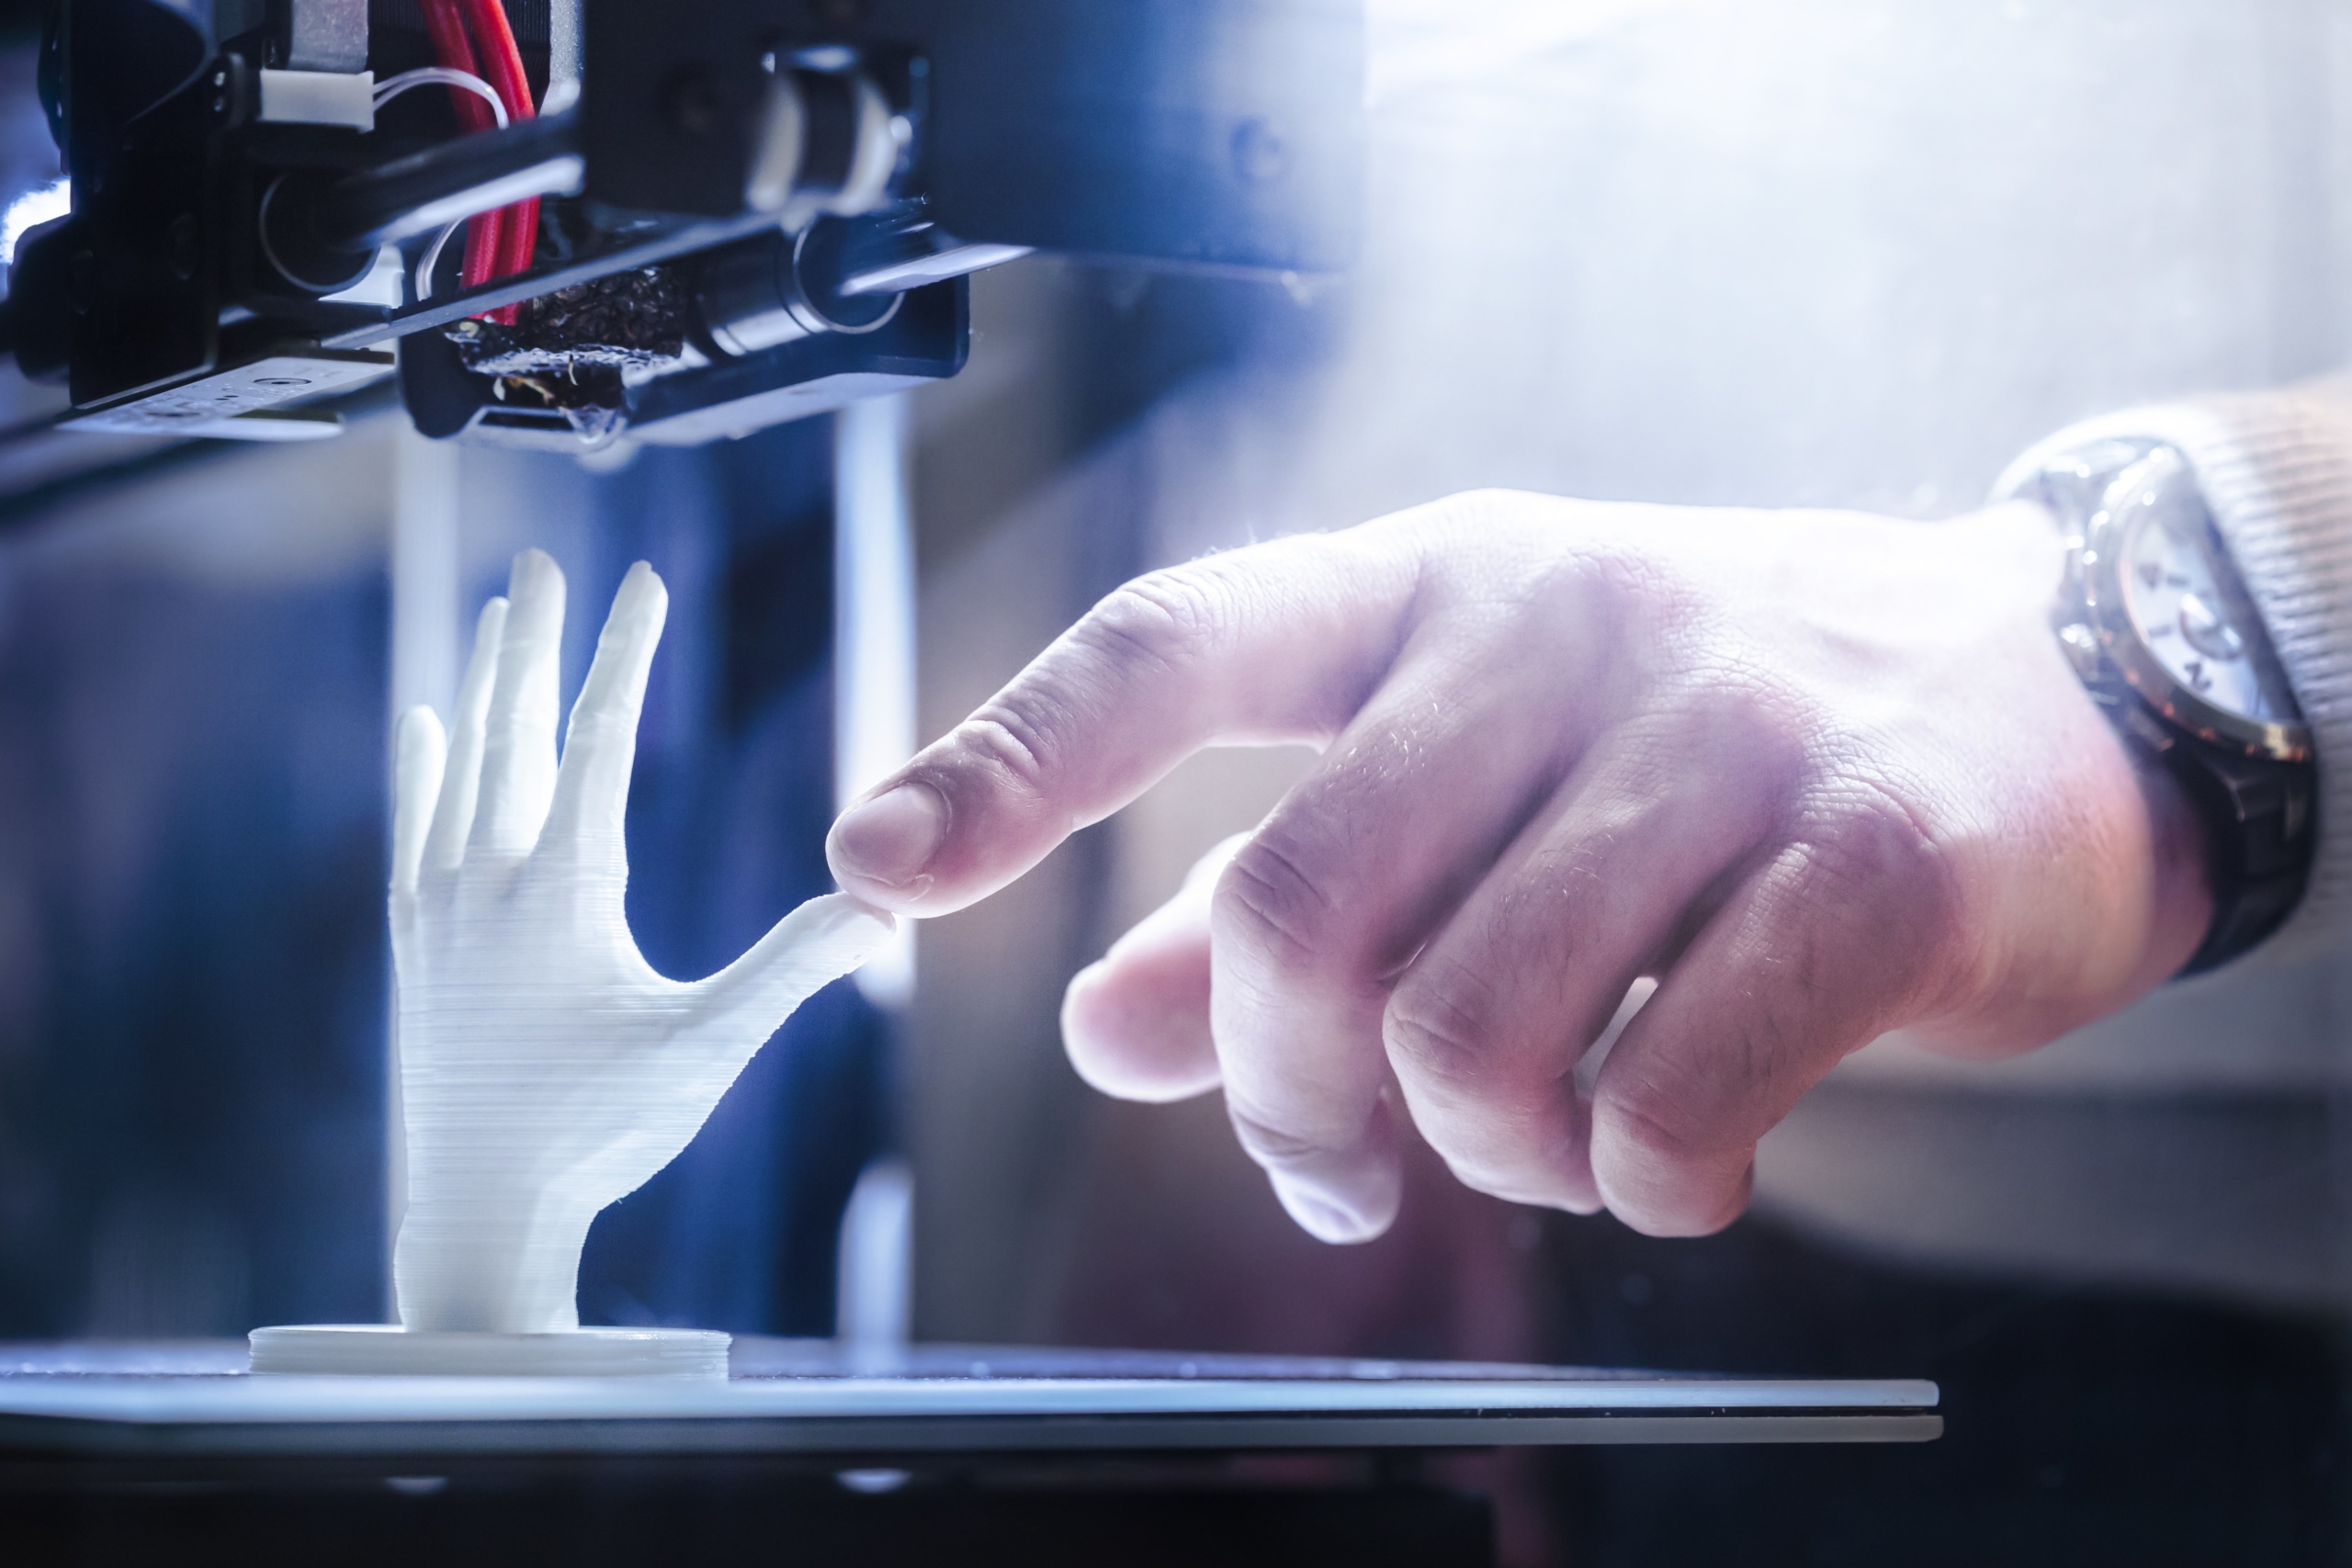 The future of retail apps lies in 3D printing and AI